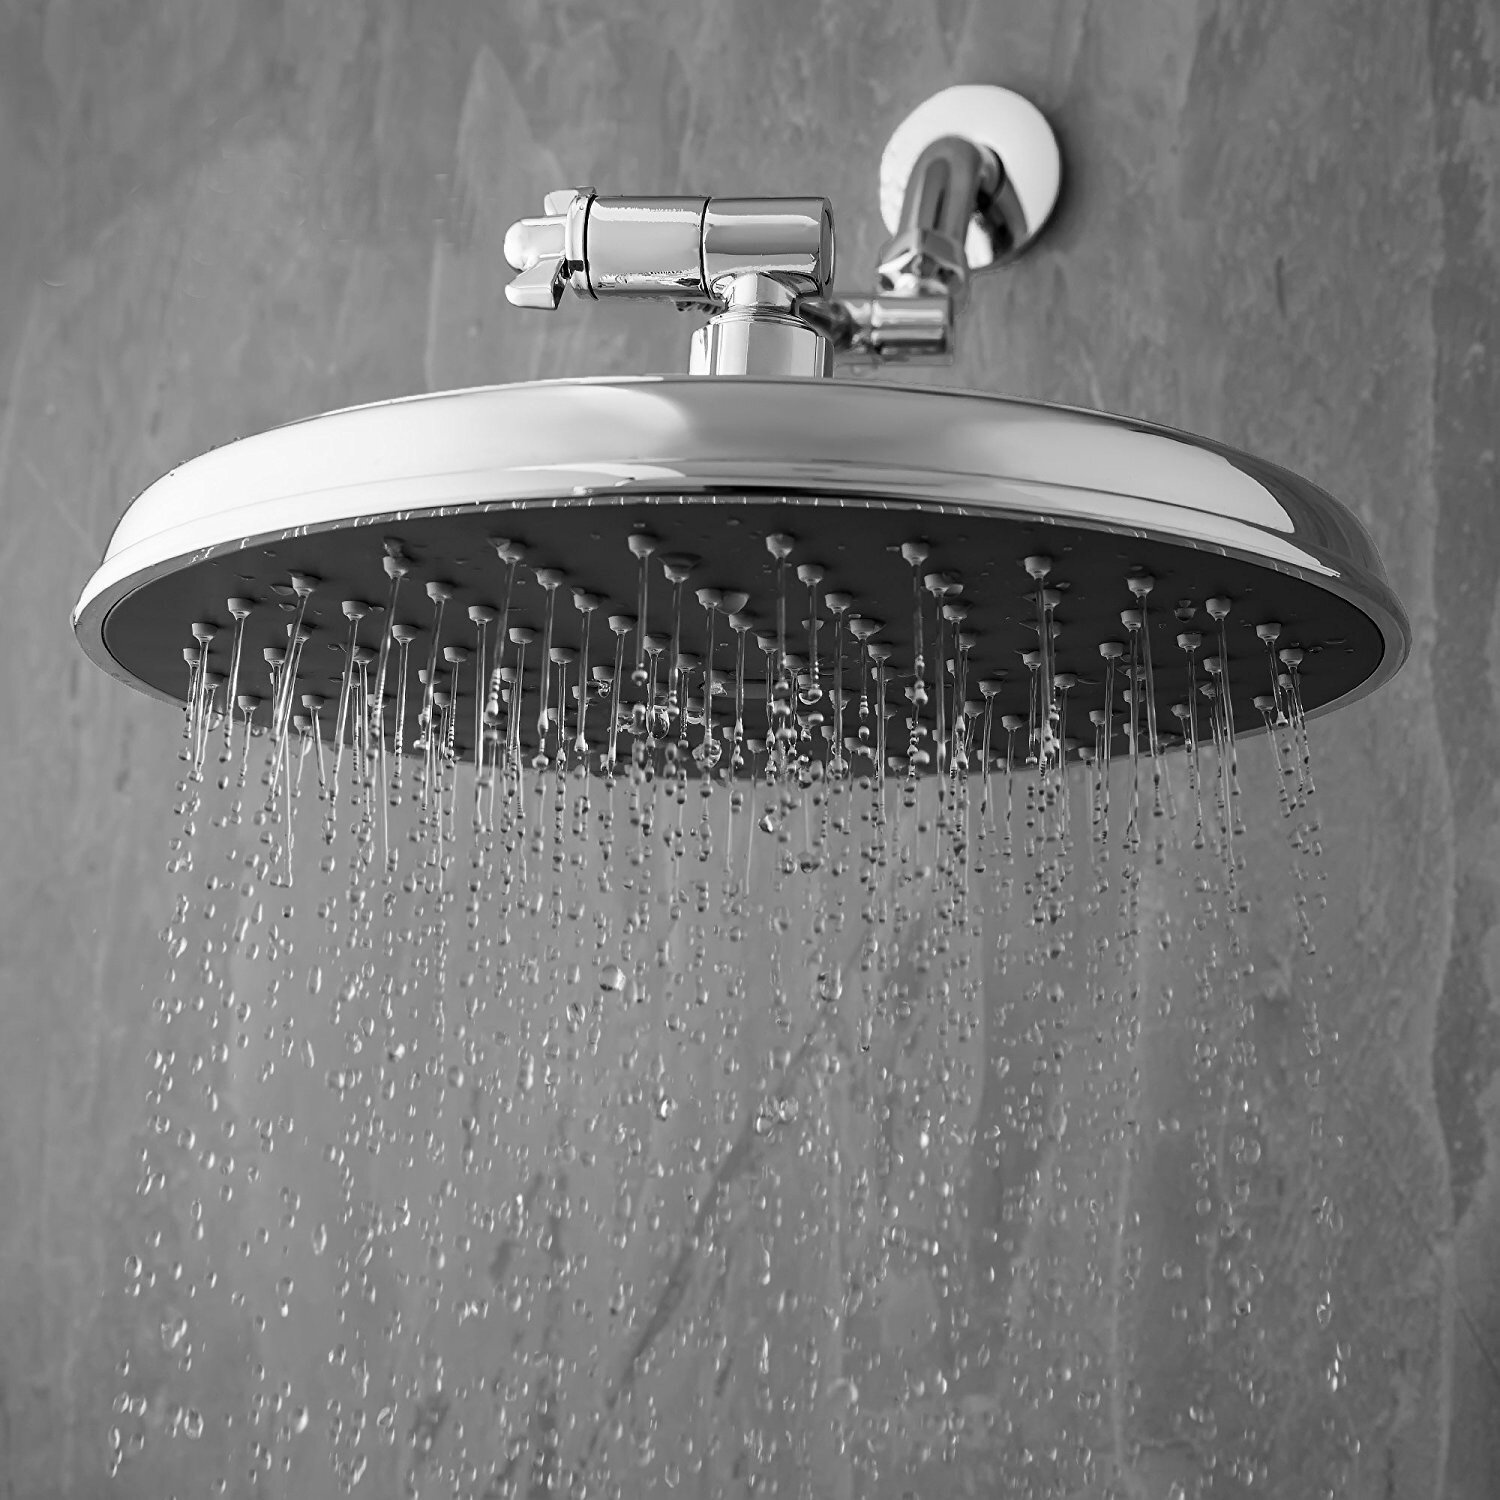 

9 Inch ABS Rainfall Shower Head 360° Adjustment Top Spray Pressurize Water Saving With Adjustable Extension Arm